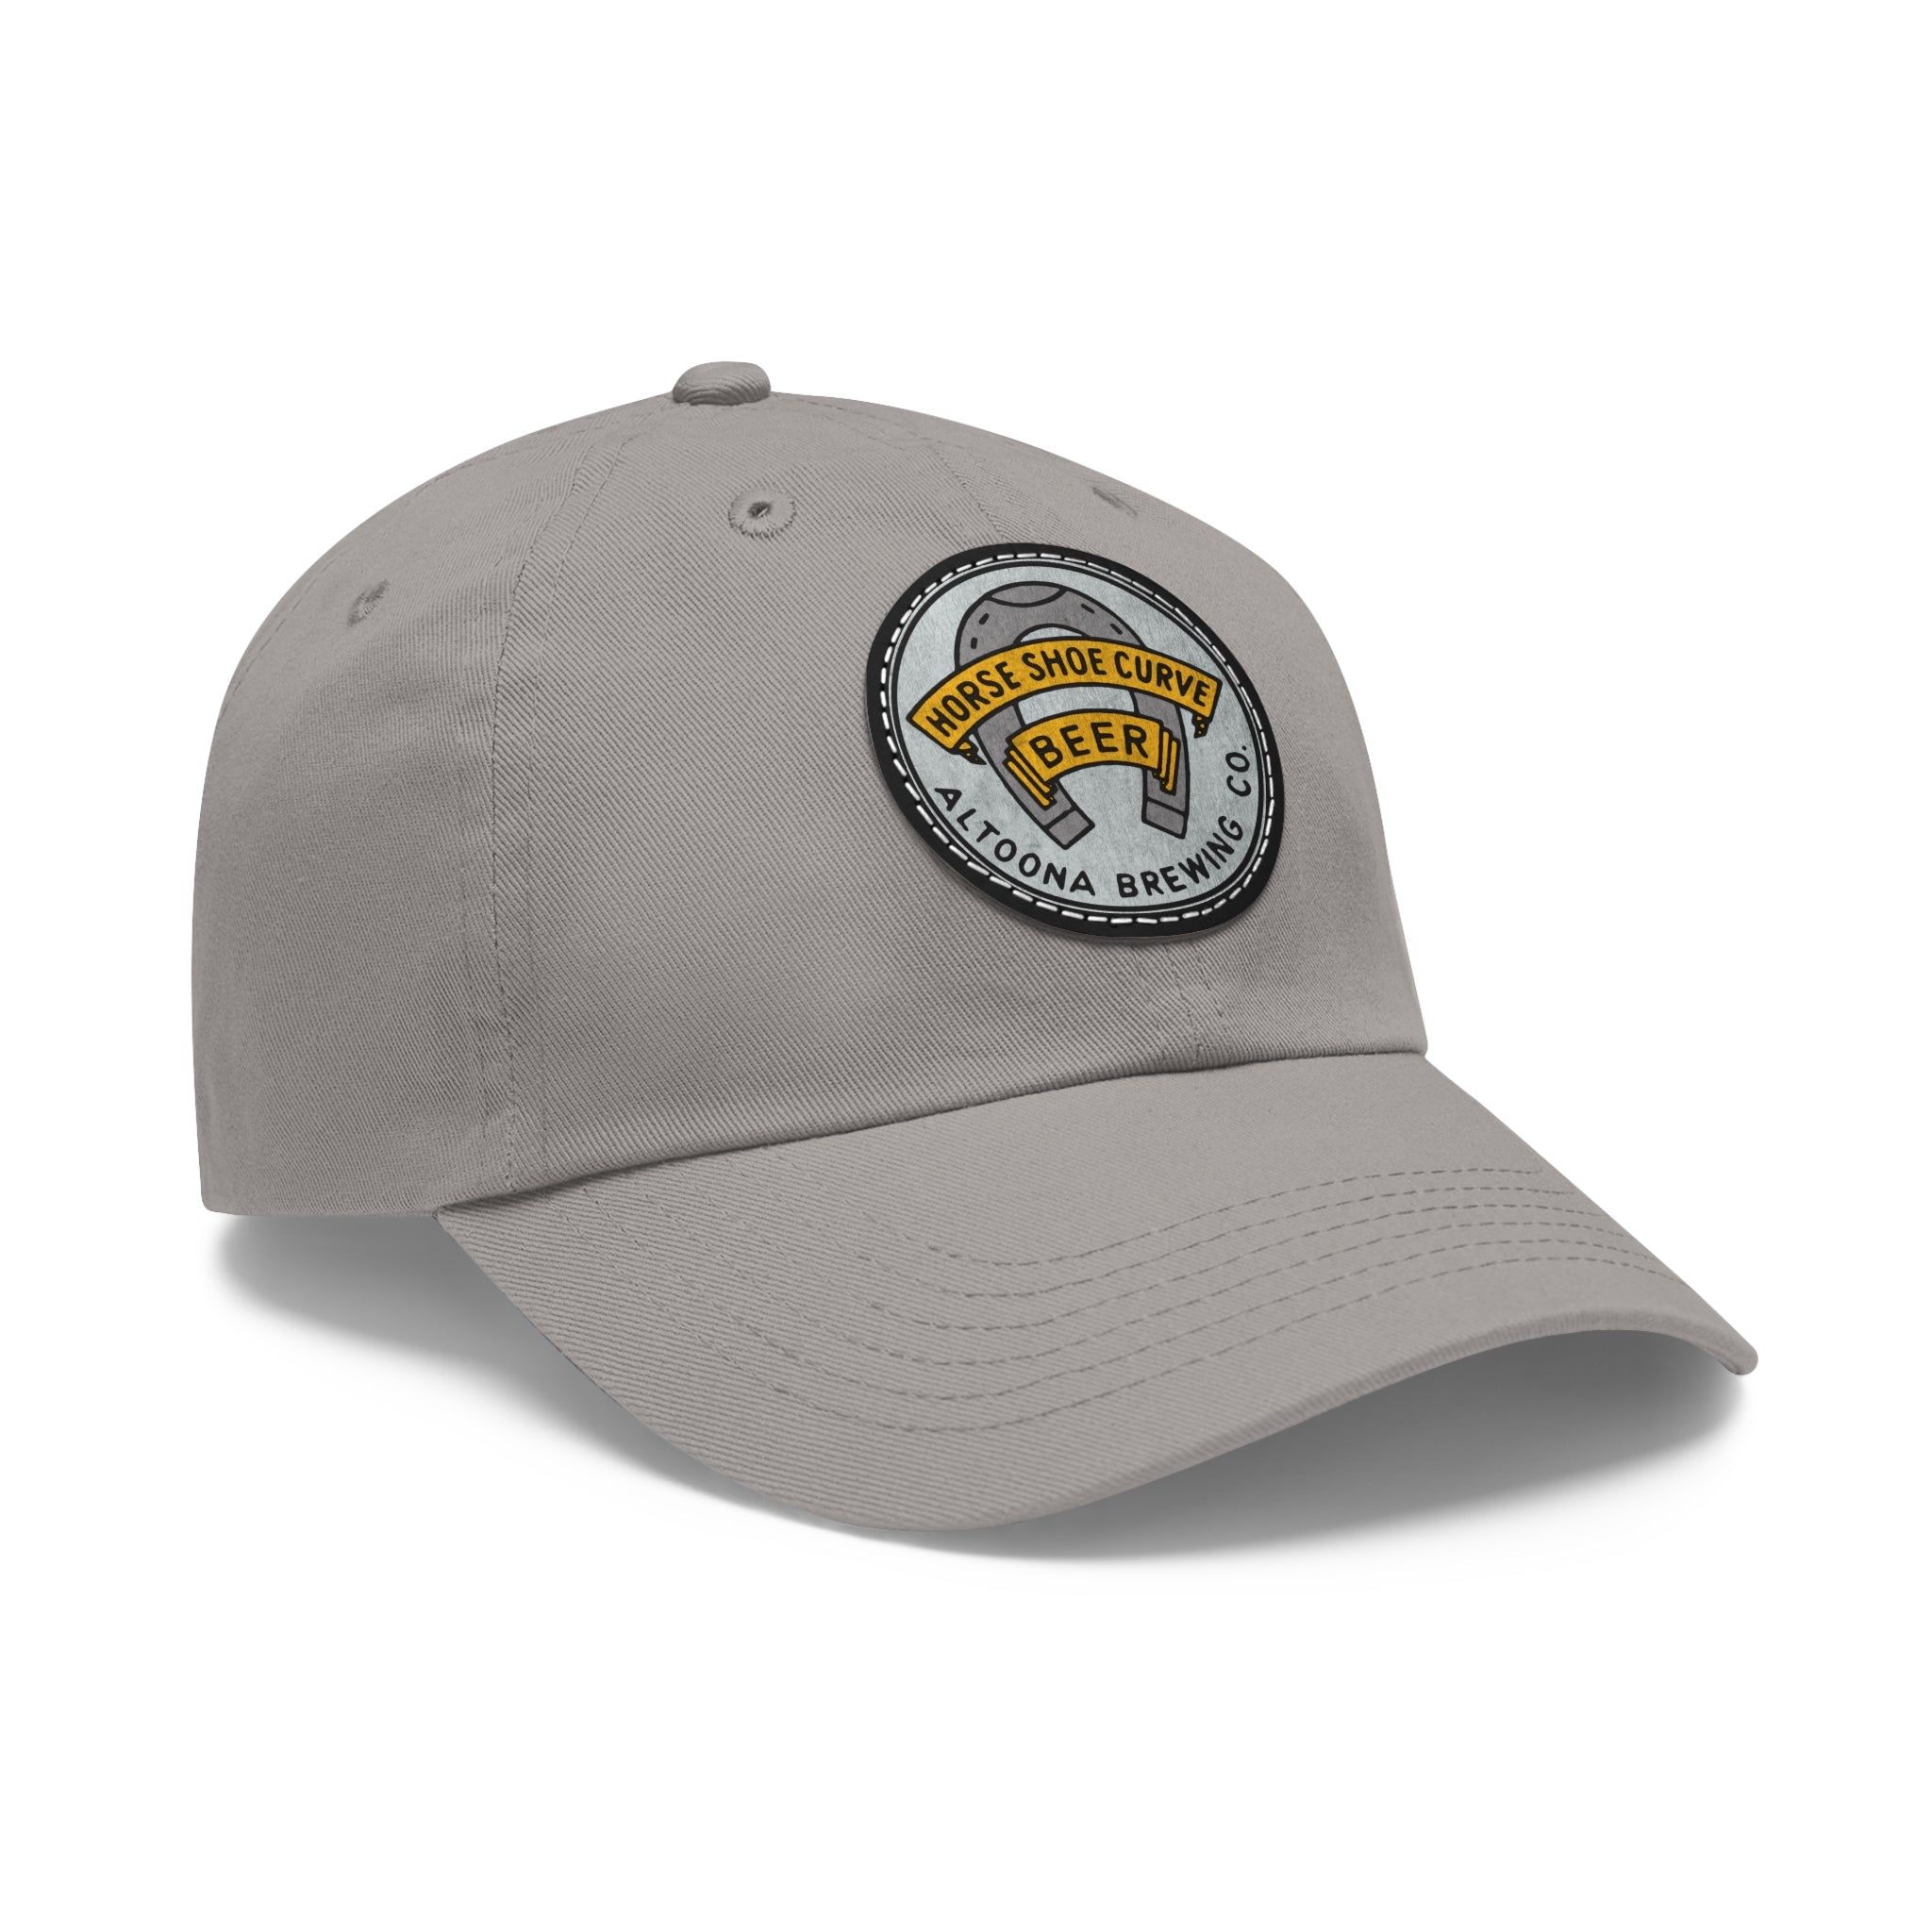 Horse Shoe Curve Beer - Altoona, PA - Printed Patch Hat - Yinzylvania